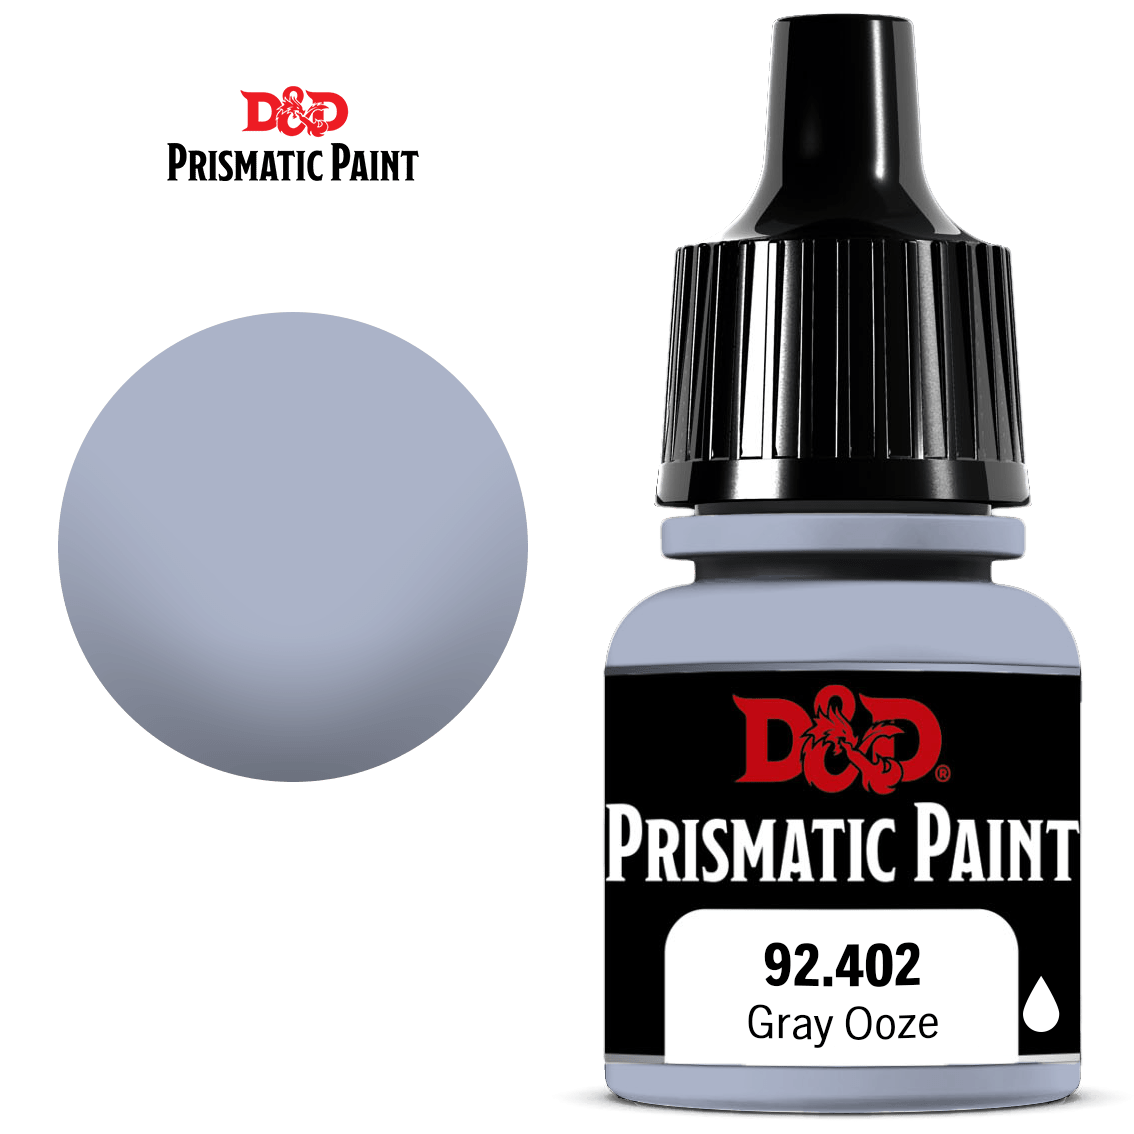 PRISMATIC PAINT: GRAY OOZE | BD Cosmos